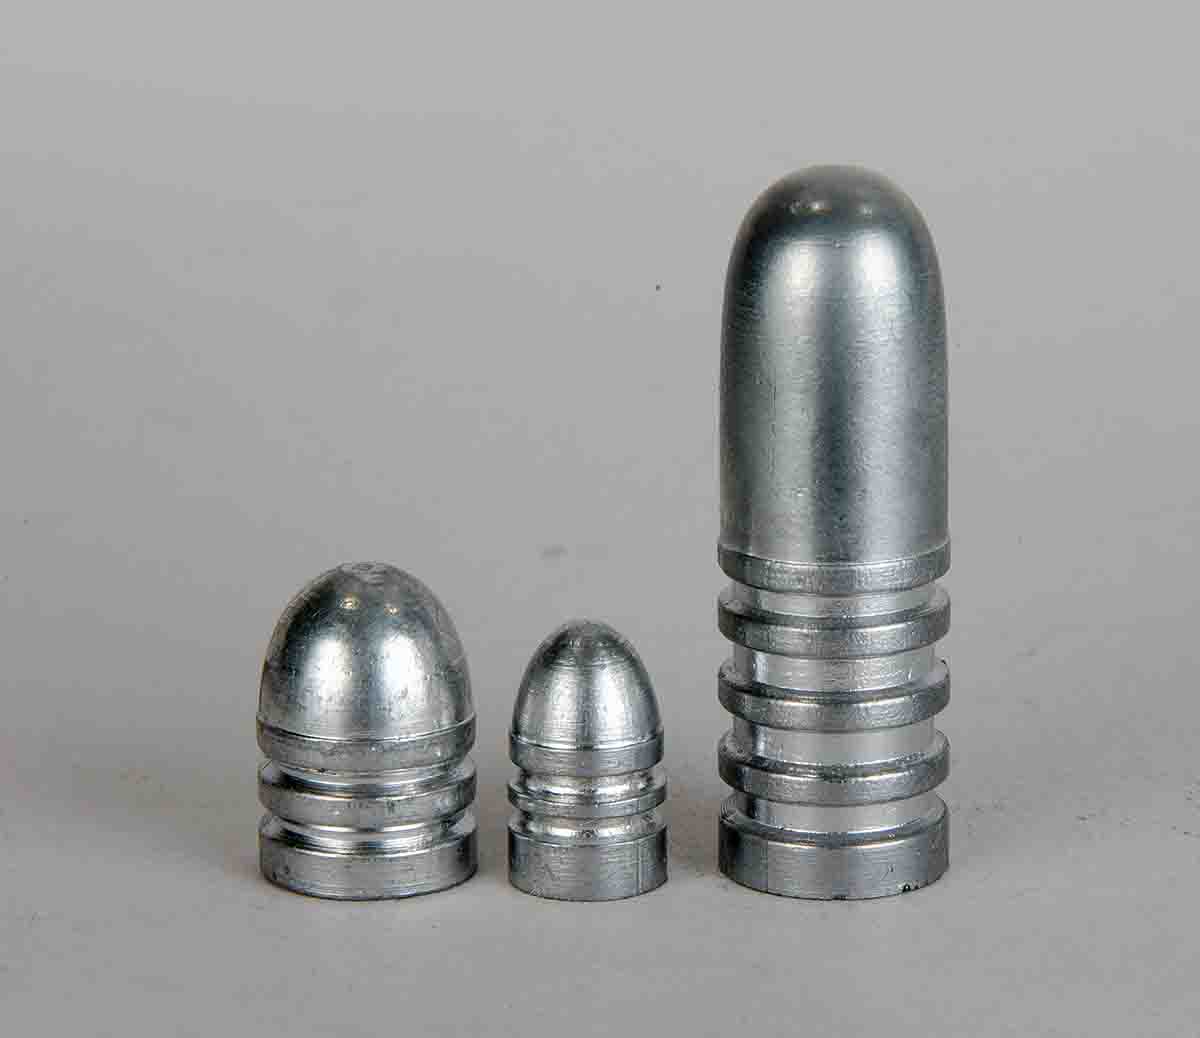 A reader once commented to Mike that his goal was to cast suchgood-looking bullets. For most handloaders, it takes years of practice.